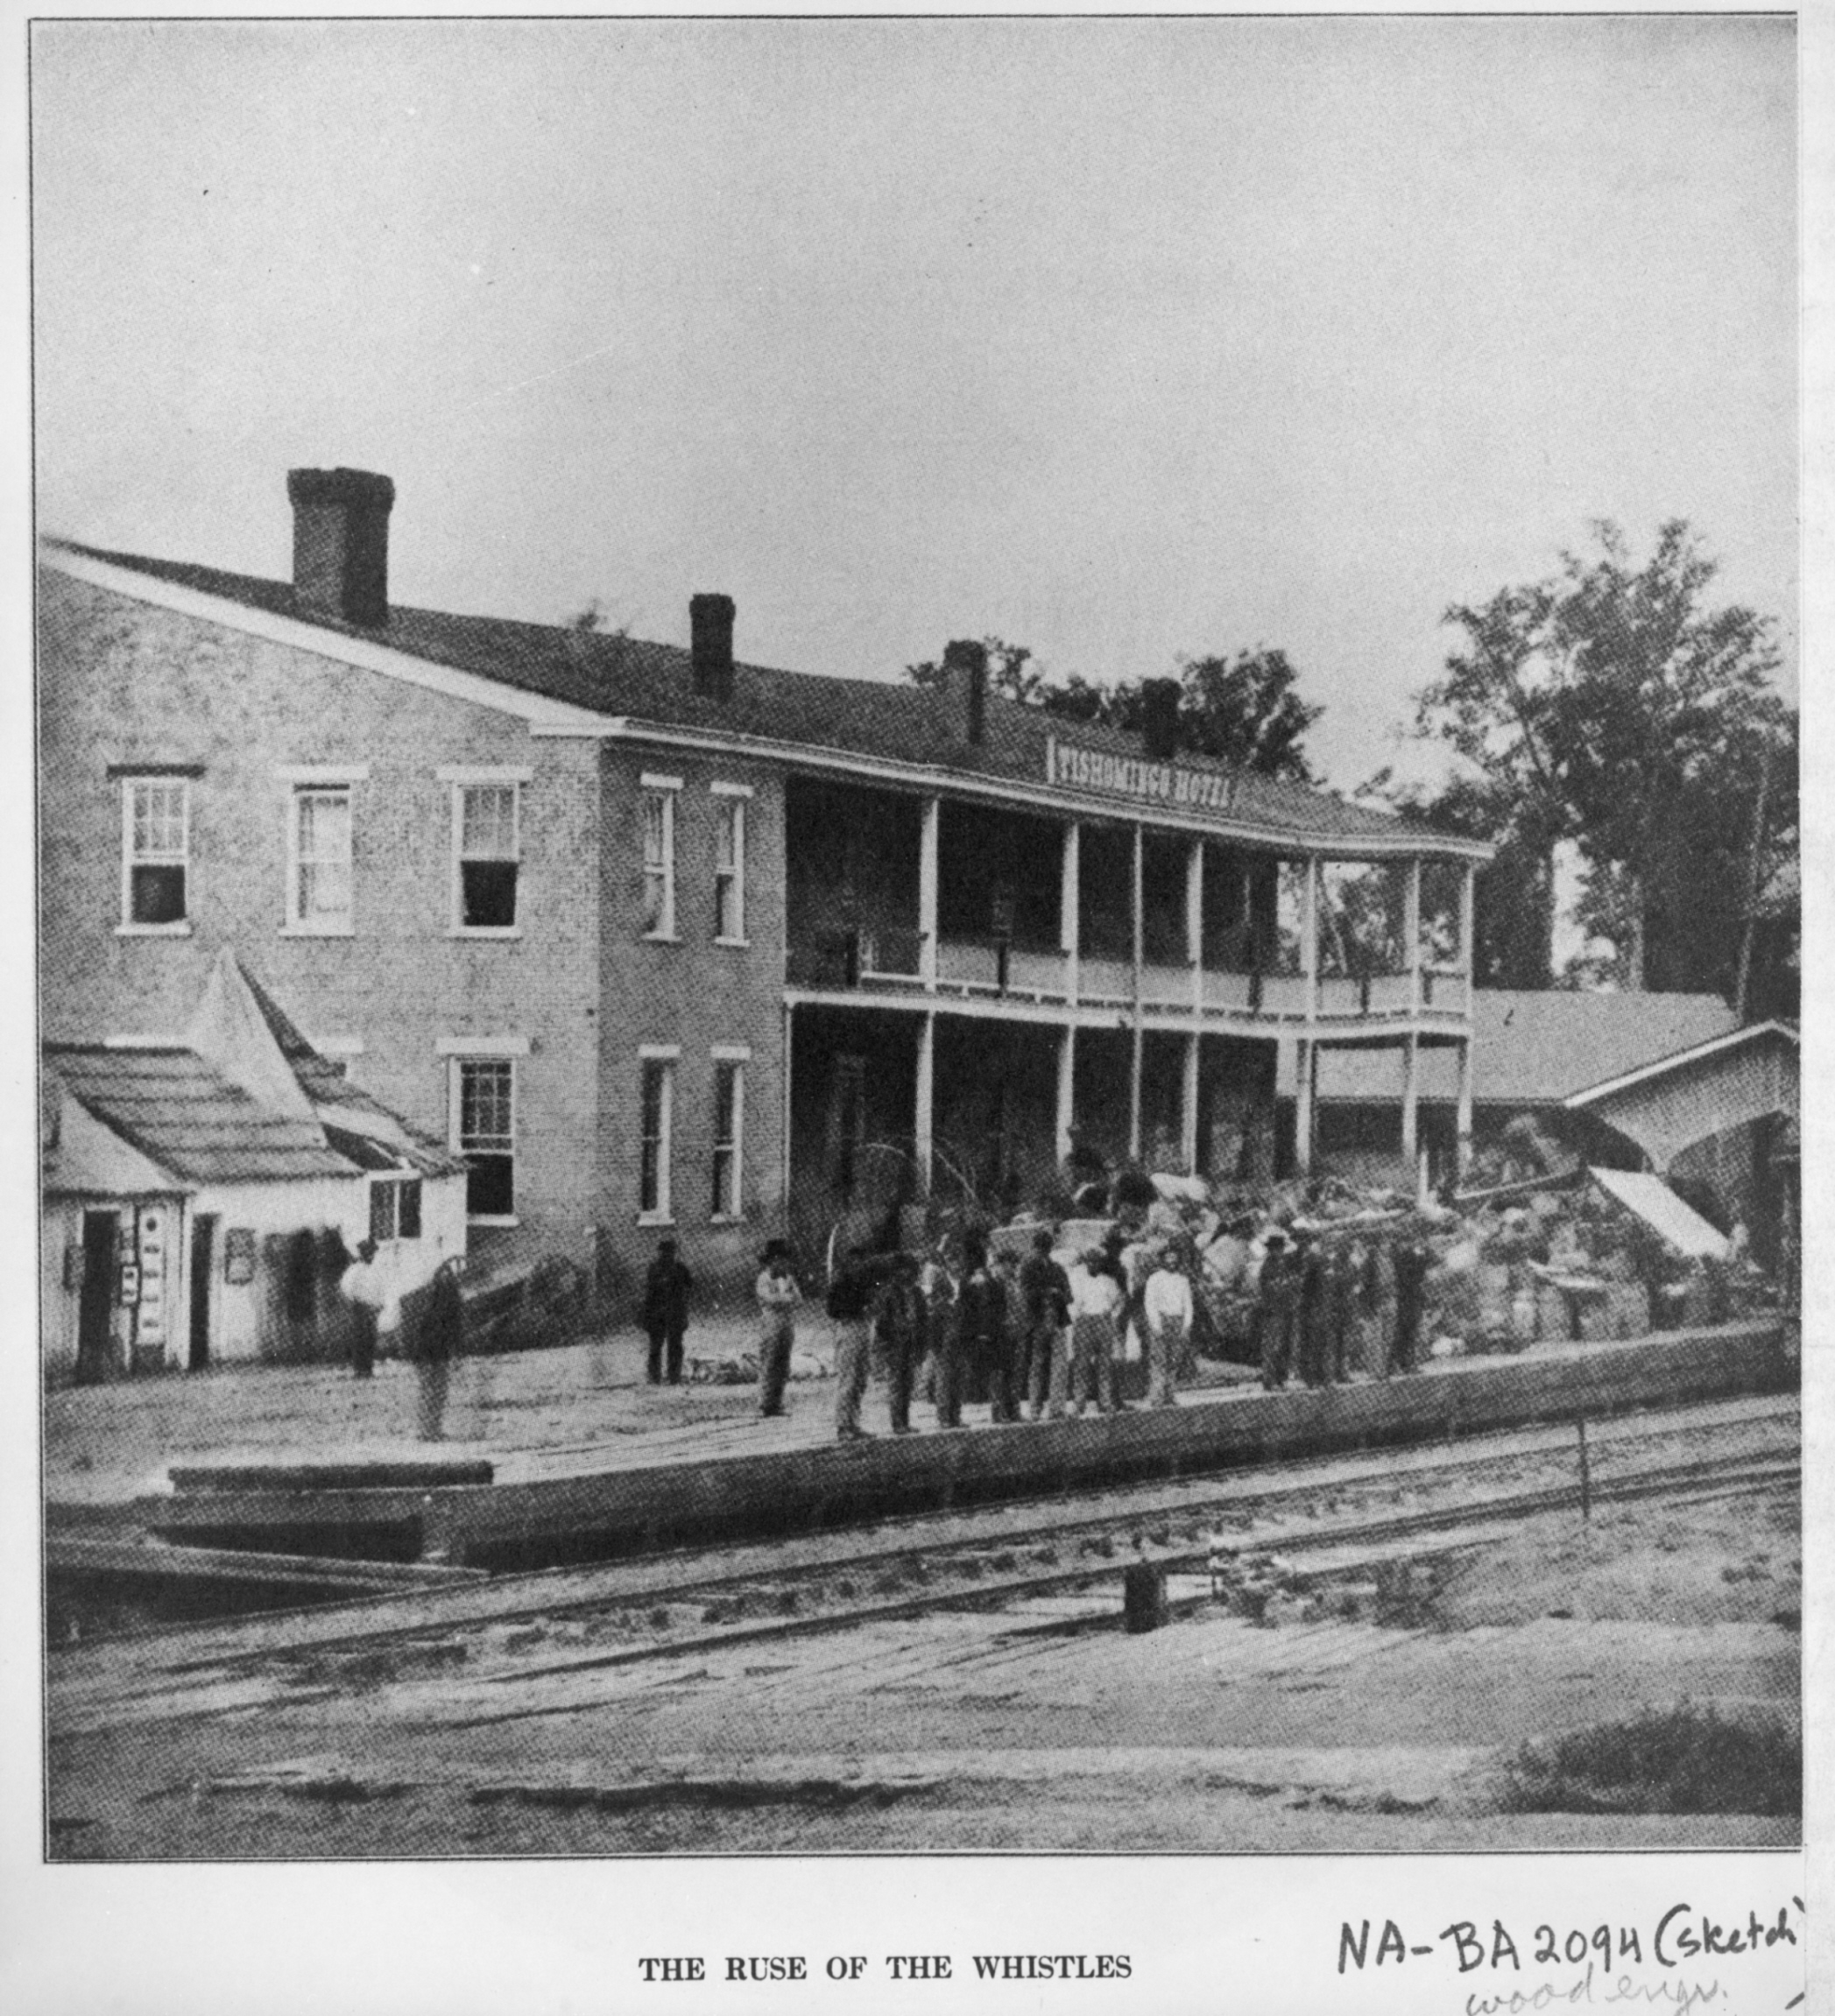 'The ruse of the whistles - the guarded track, Corinth, Mississippi, 1862' Published in The Photographic history of the Civil War, New York:Review of Reviews Co., 1911, v. 2. Two years of grim war, p. [138-39]; Library of Congress, E468.7 .M64 1911 [P&P] 